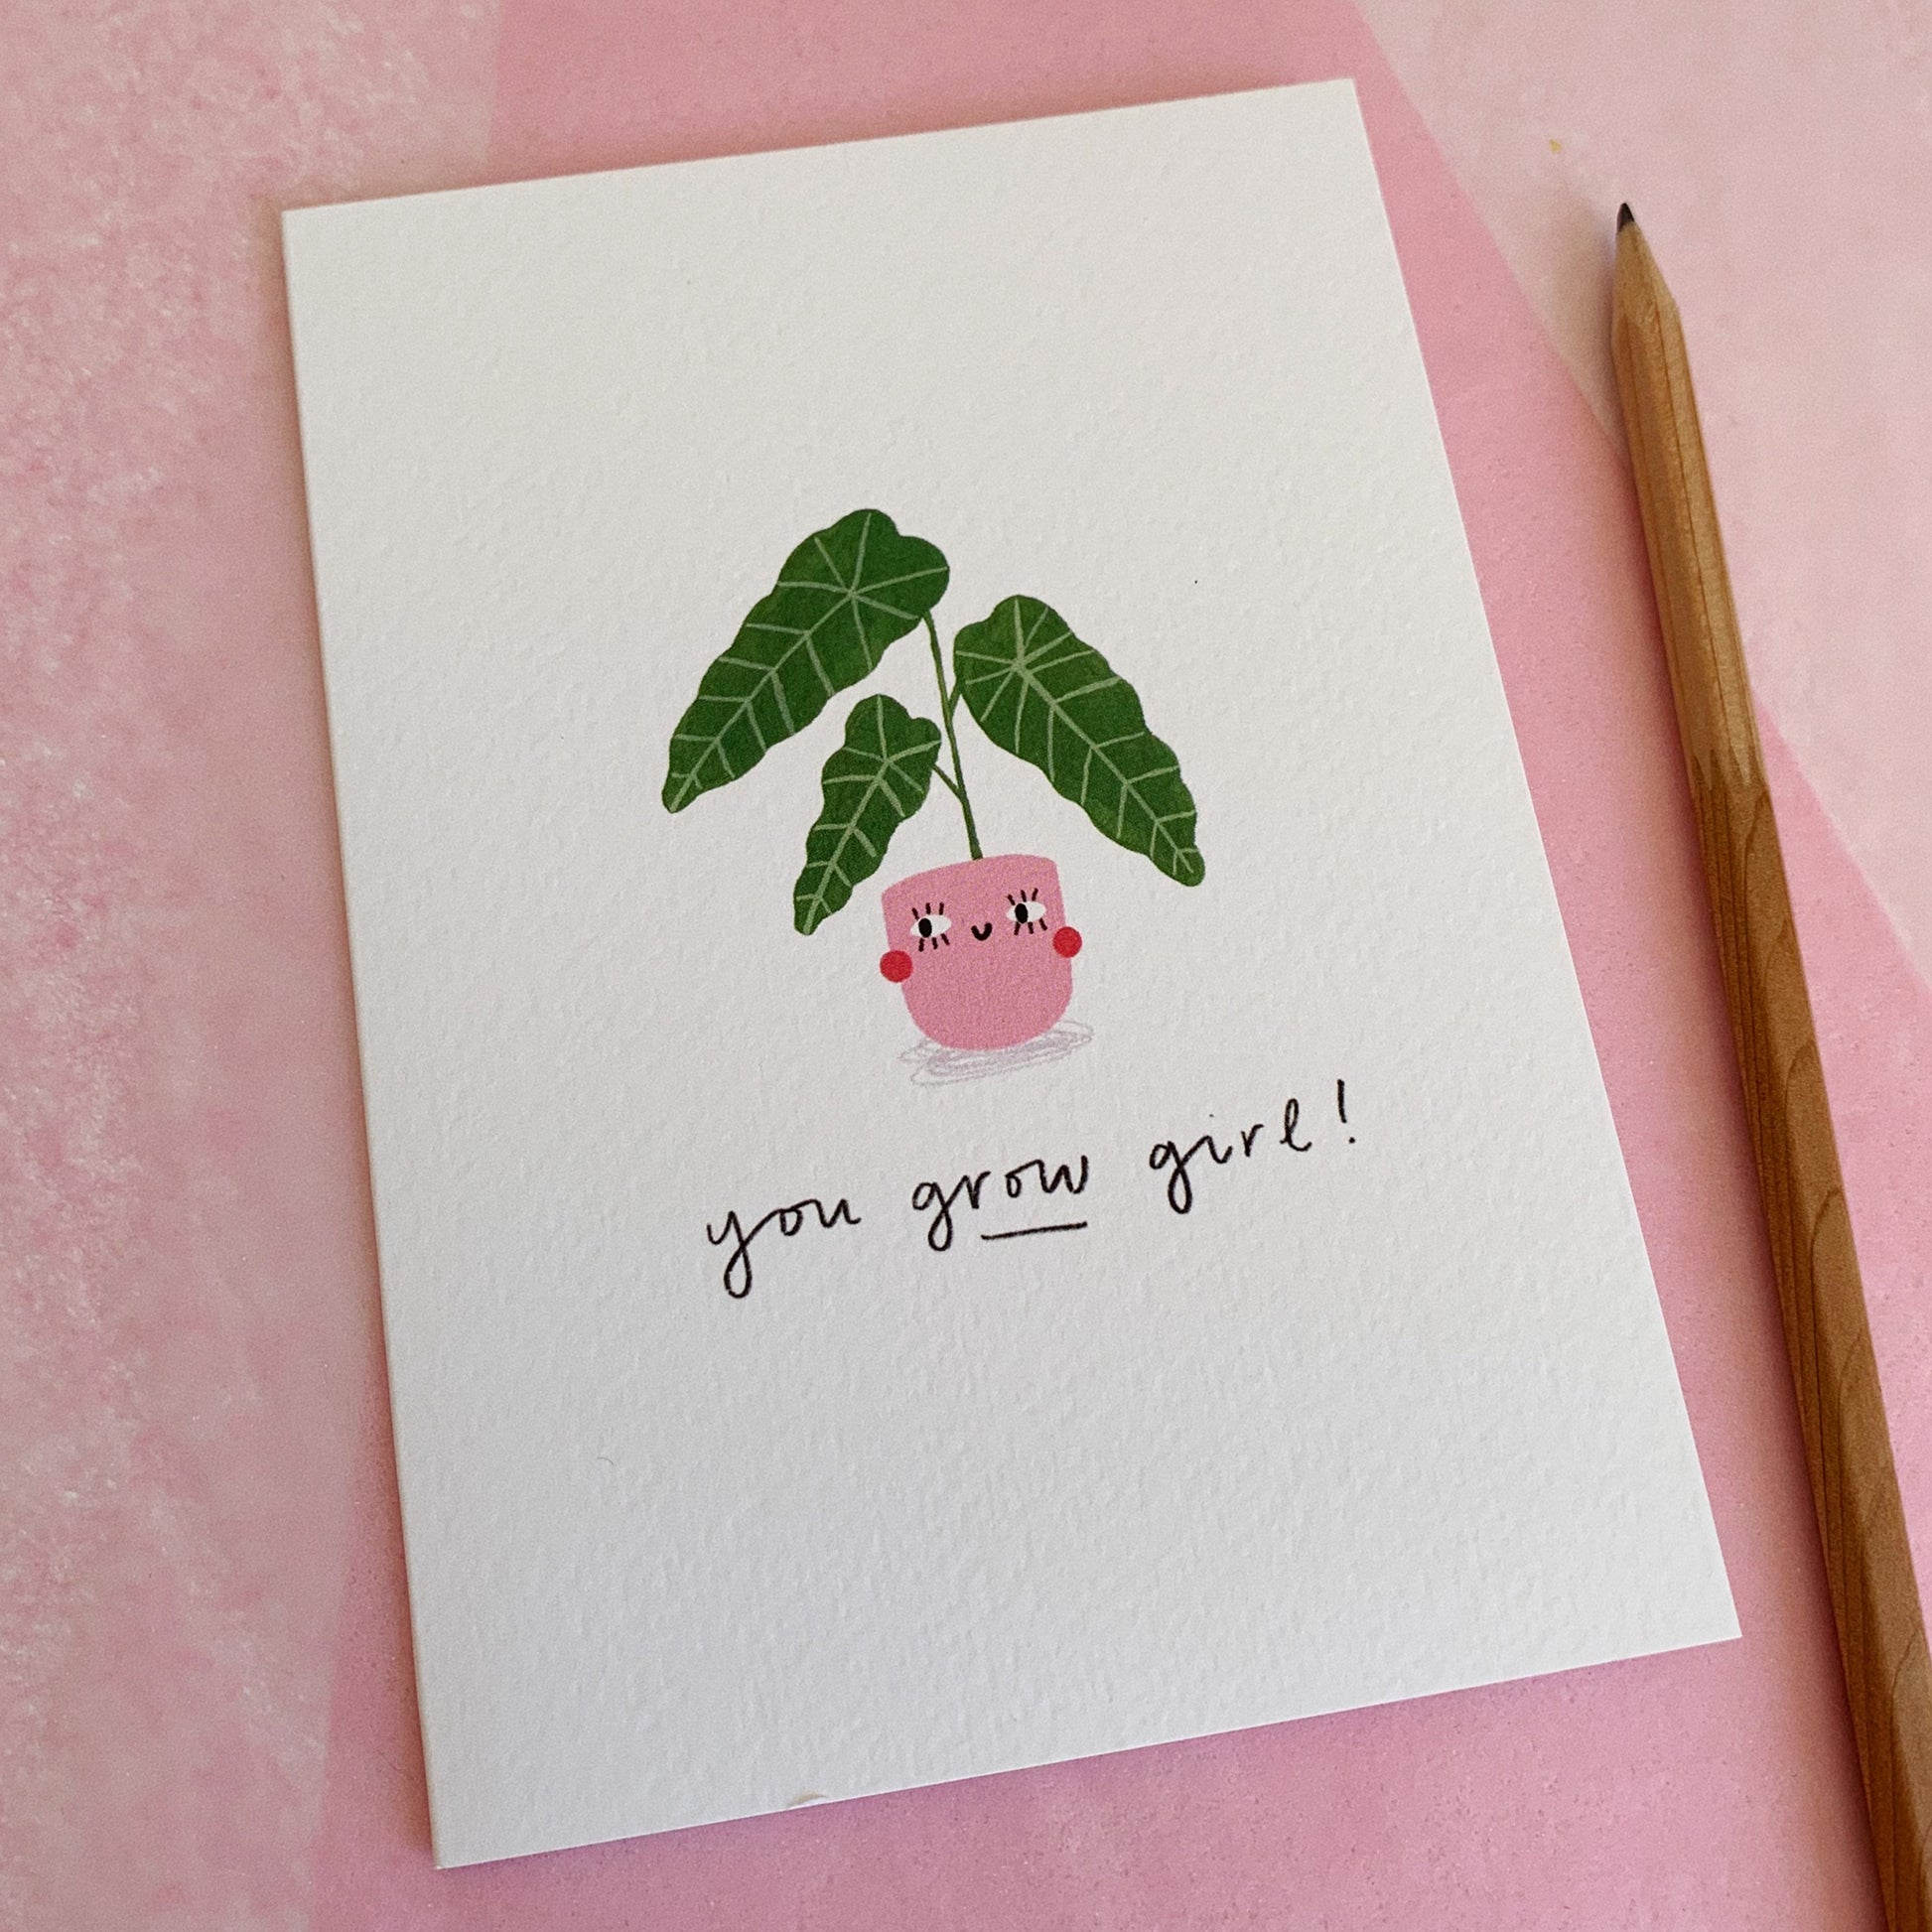 An A6 illustrated card featuring a house plant in a pink pot with a smiley face on it. The text underneath reads “You Grow Girl!”. The card lies on top of pink tissue paper and a pencil has been placed next to the card.